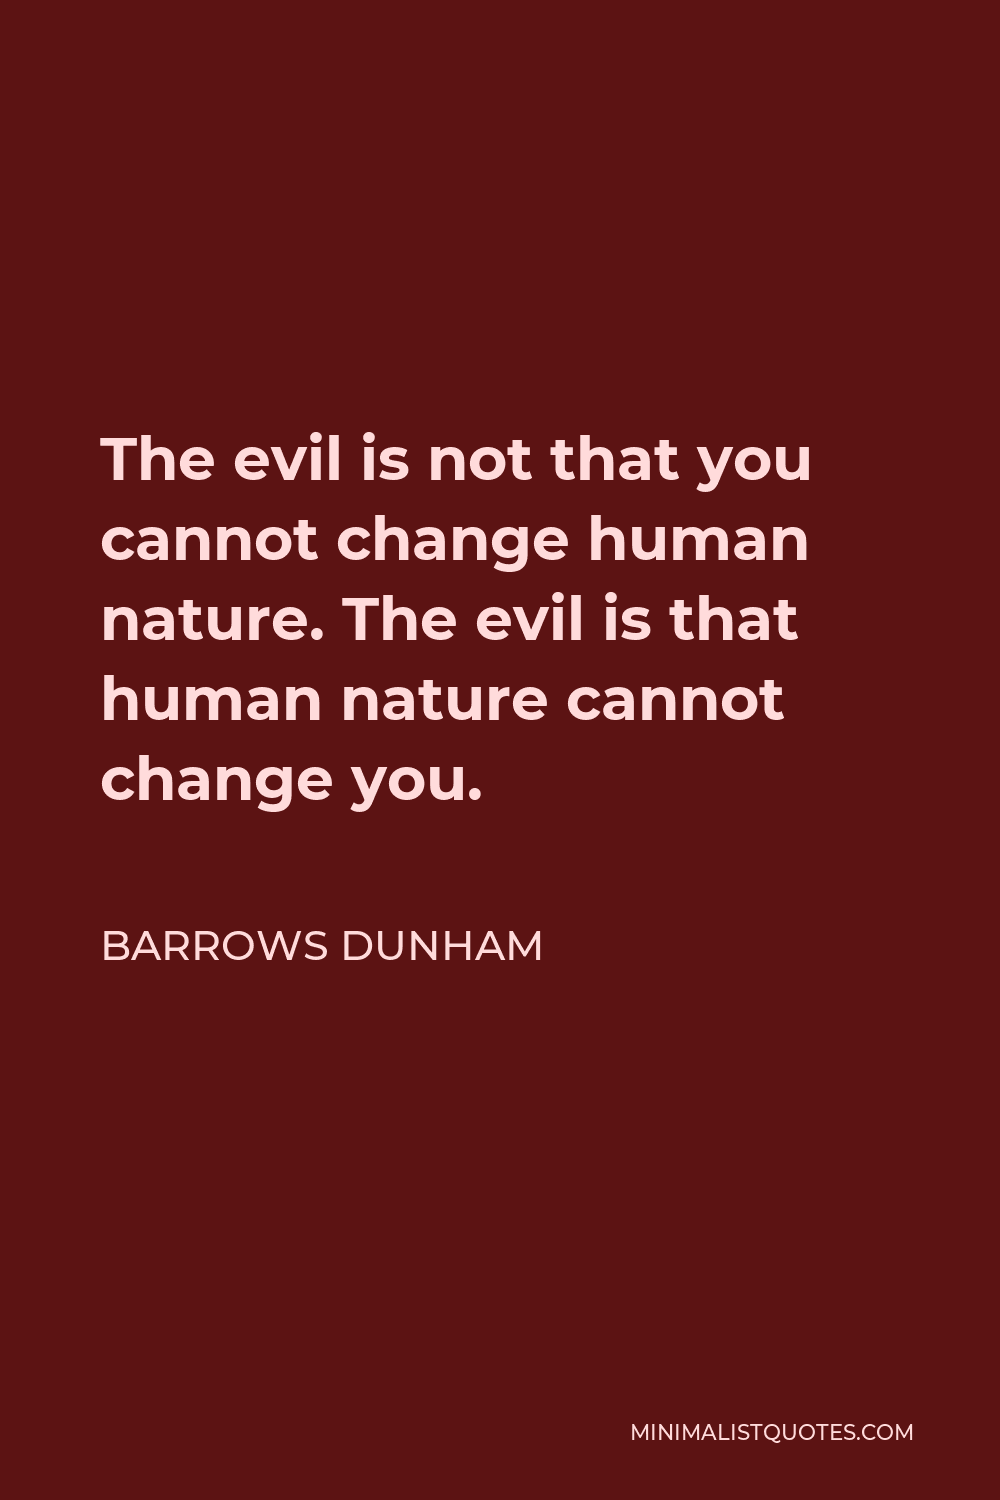 Barrows Dunham Quote - The evil is not that you cannot change human nature. The evil is that human nature cannot change you.